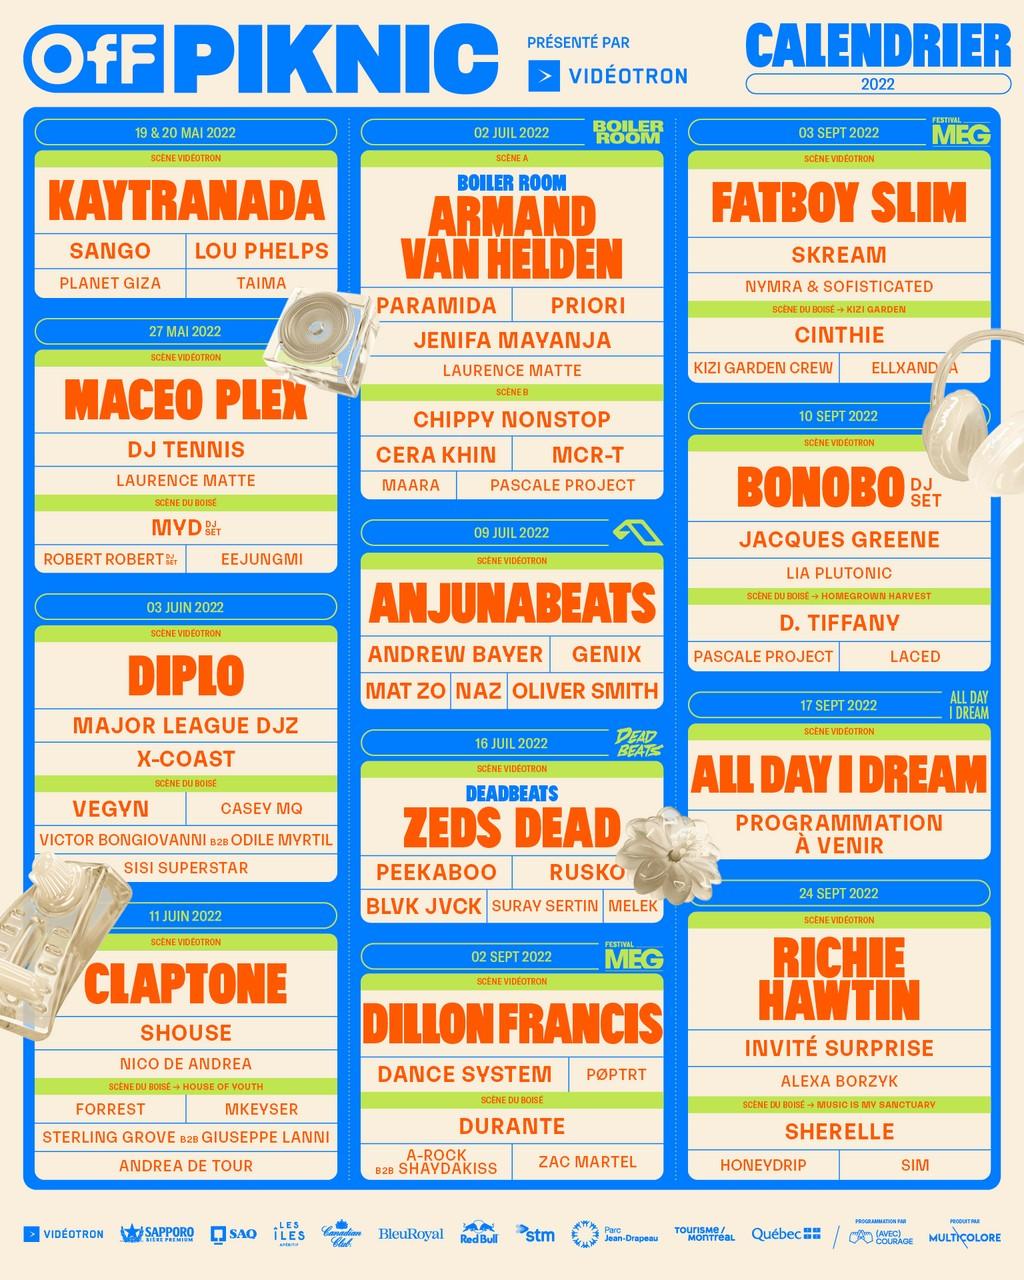 Lineup Poster OfF Piknic 2022